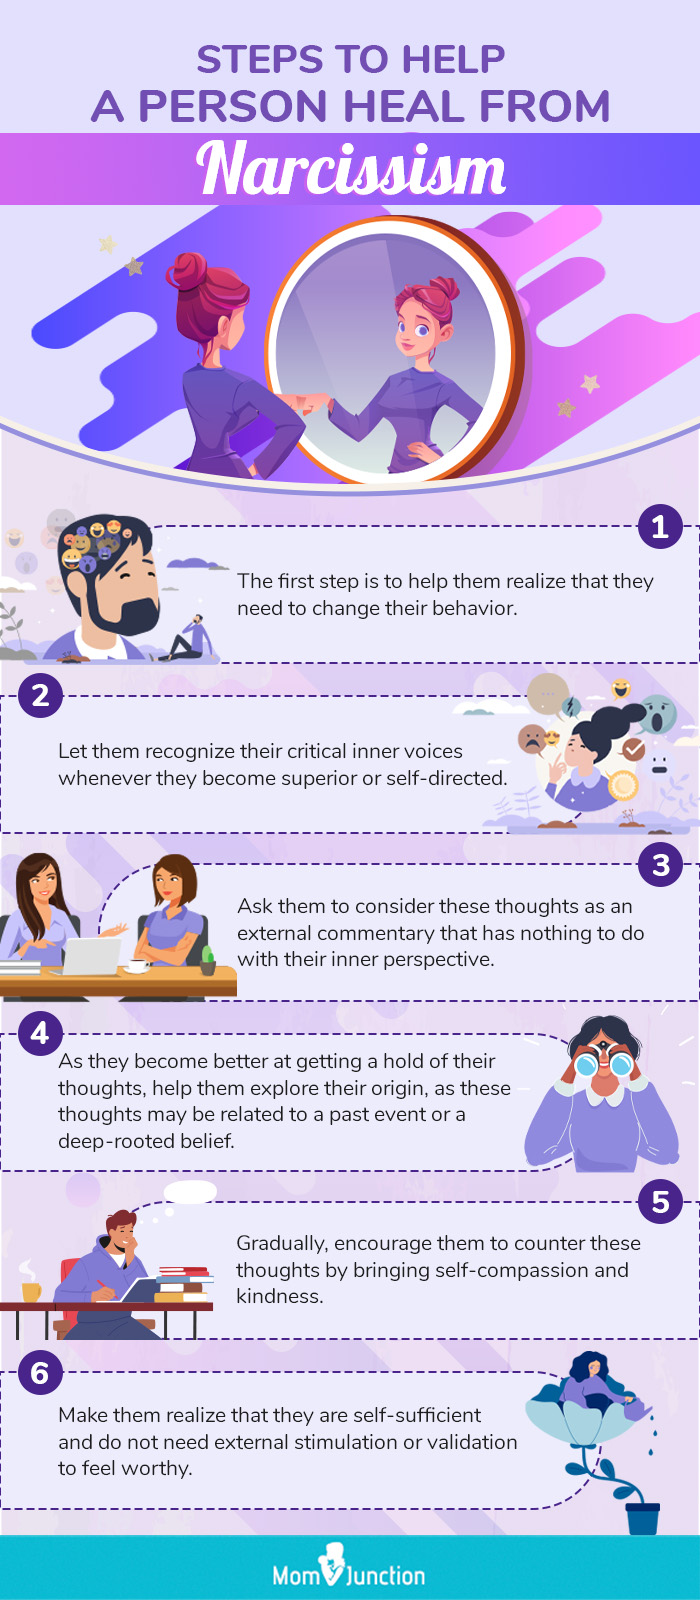 steps to help a narcissistic person (infographic)